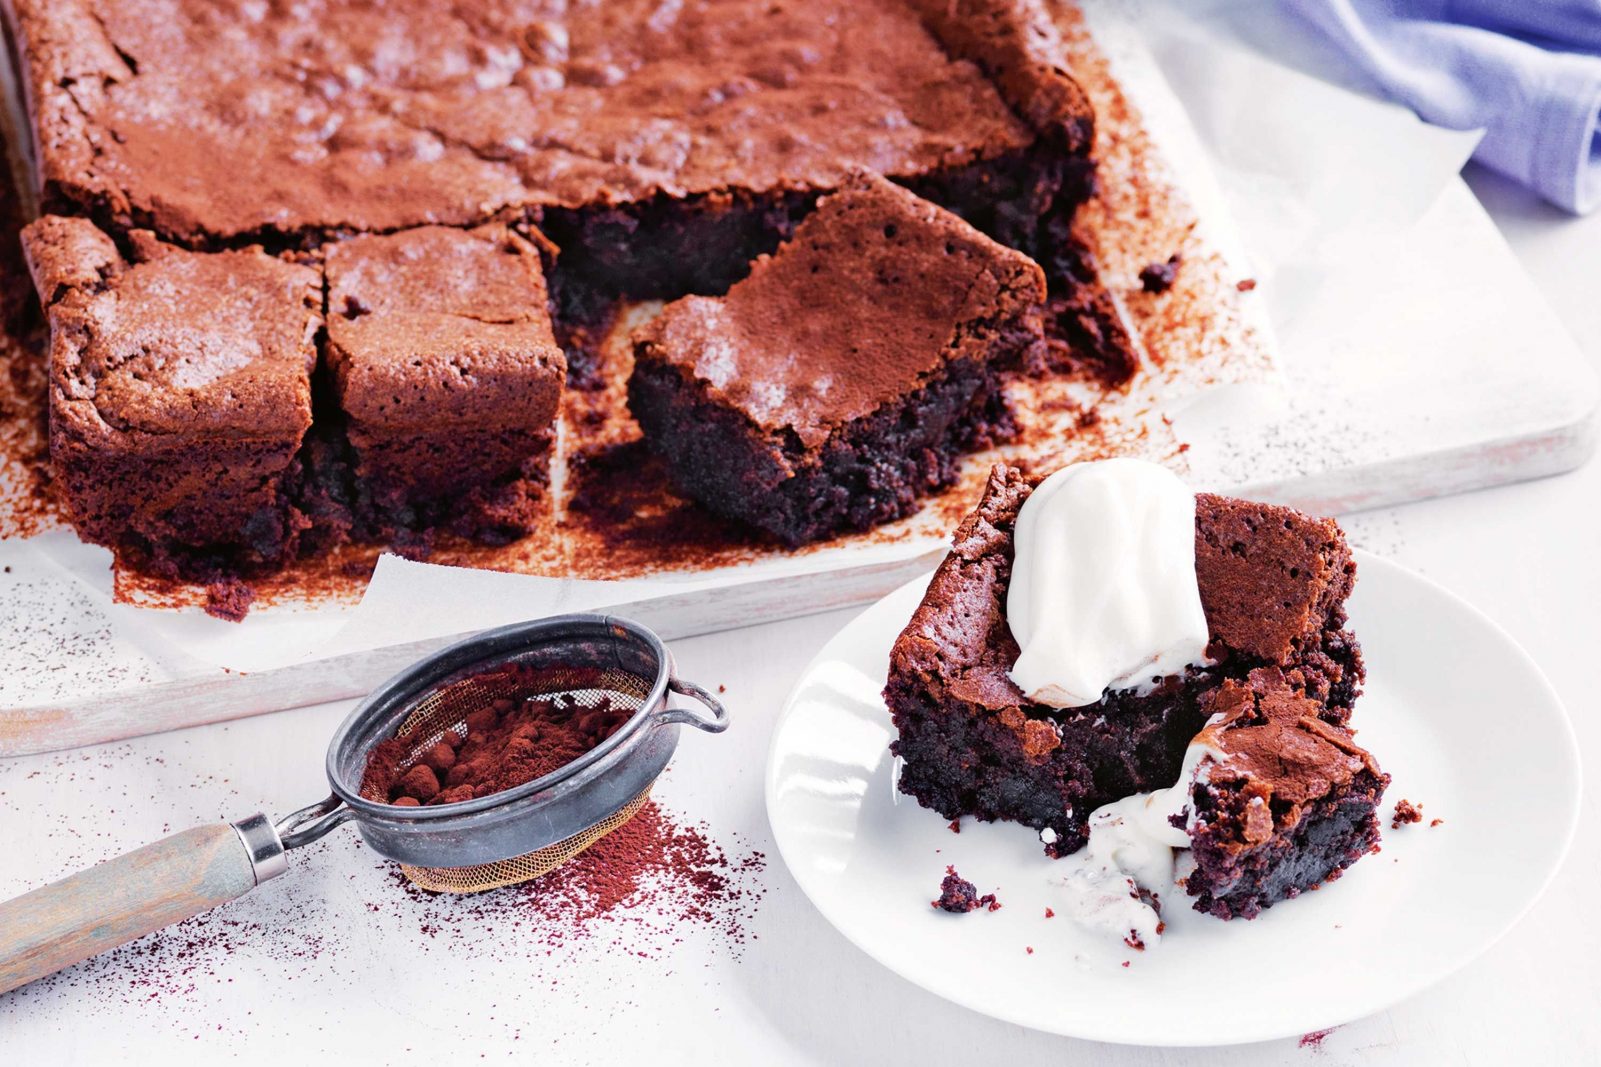 What Will Your Next Boyfriend Be Like? Make Some Tough Food Choices to Find Out Flourless chocolate cake